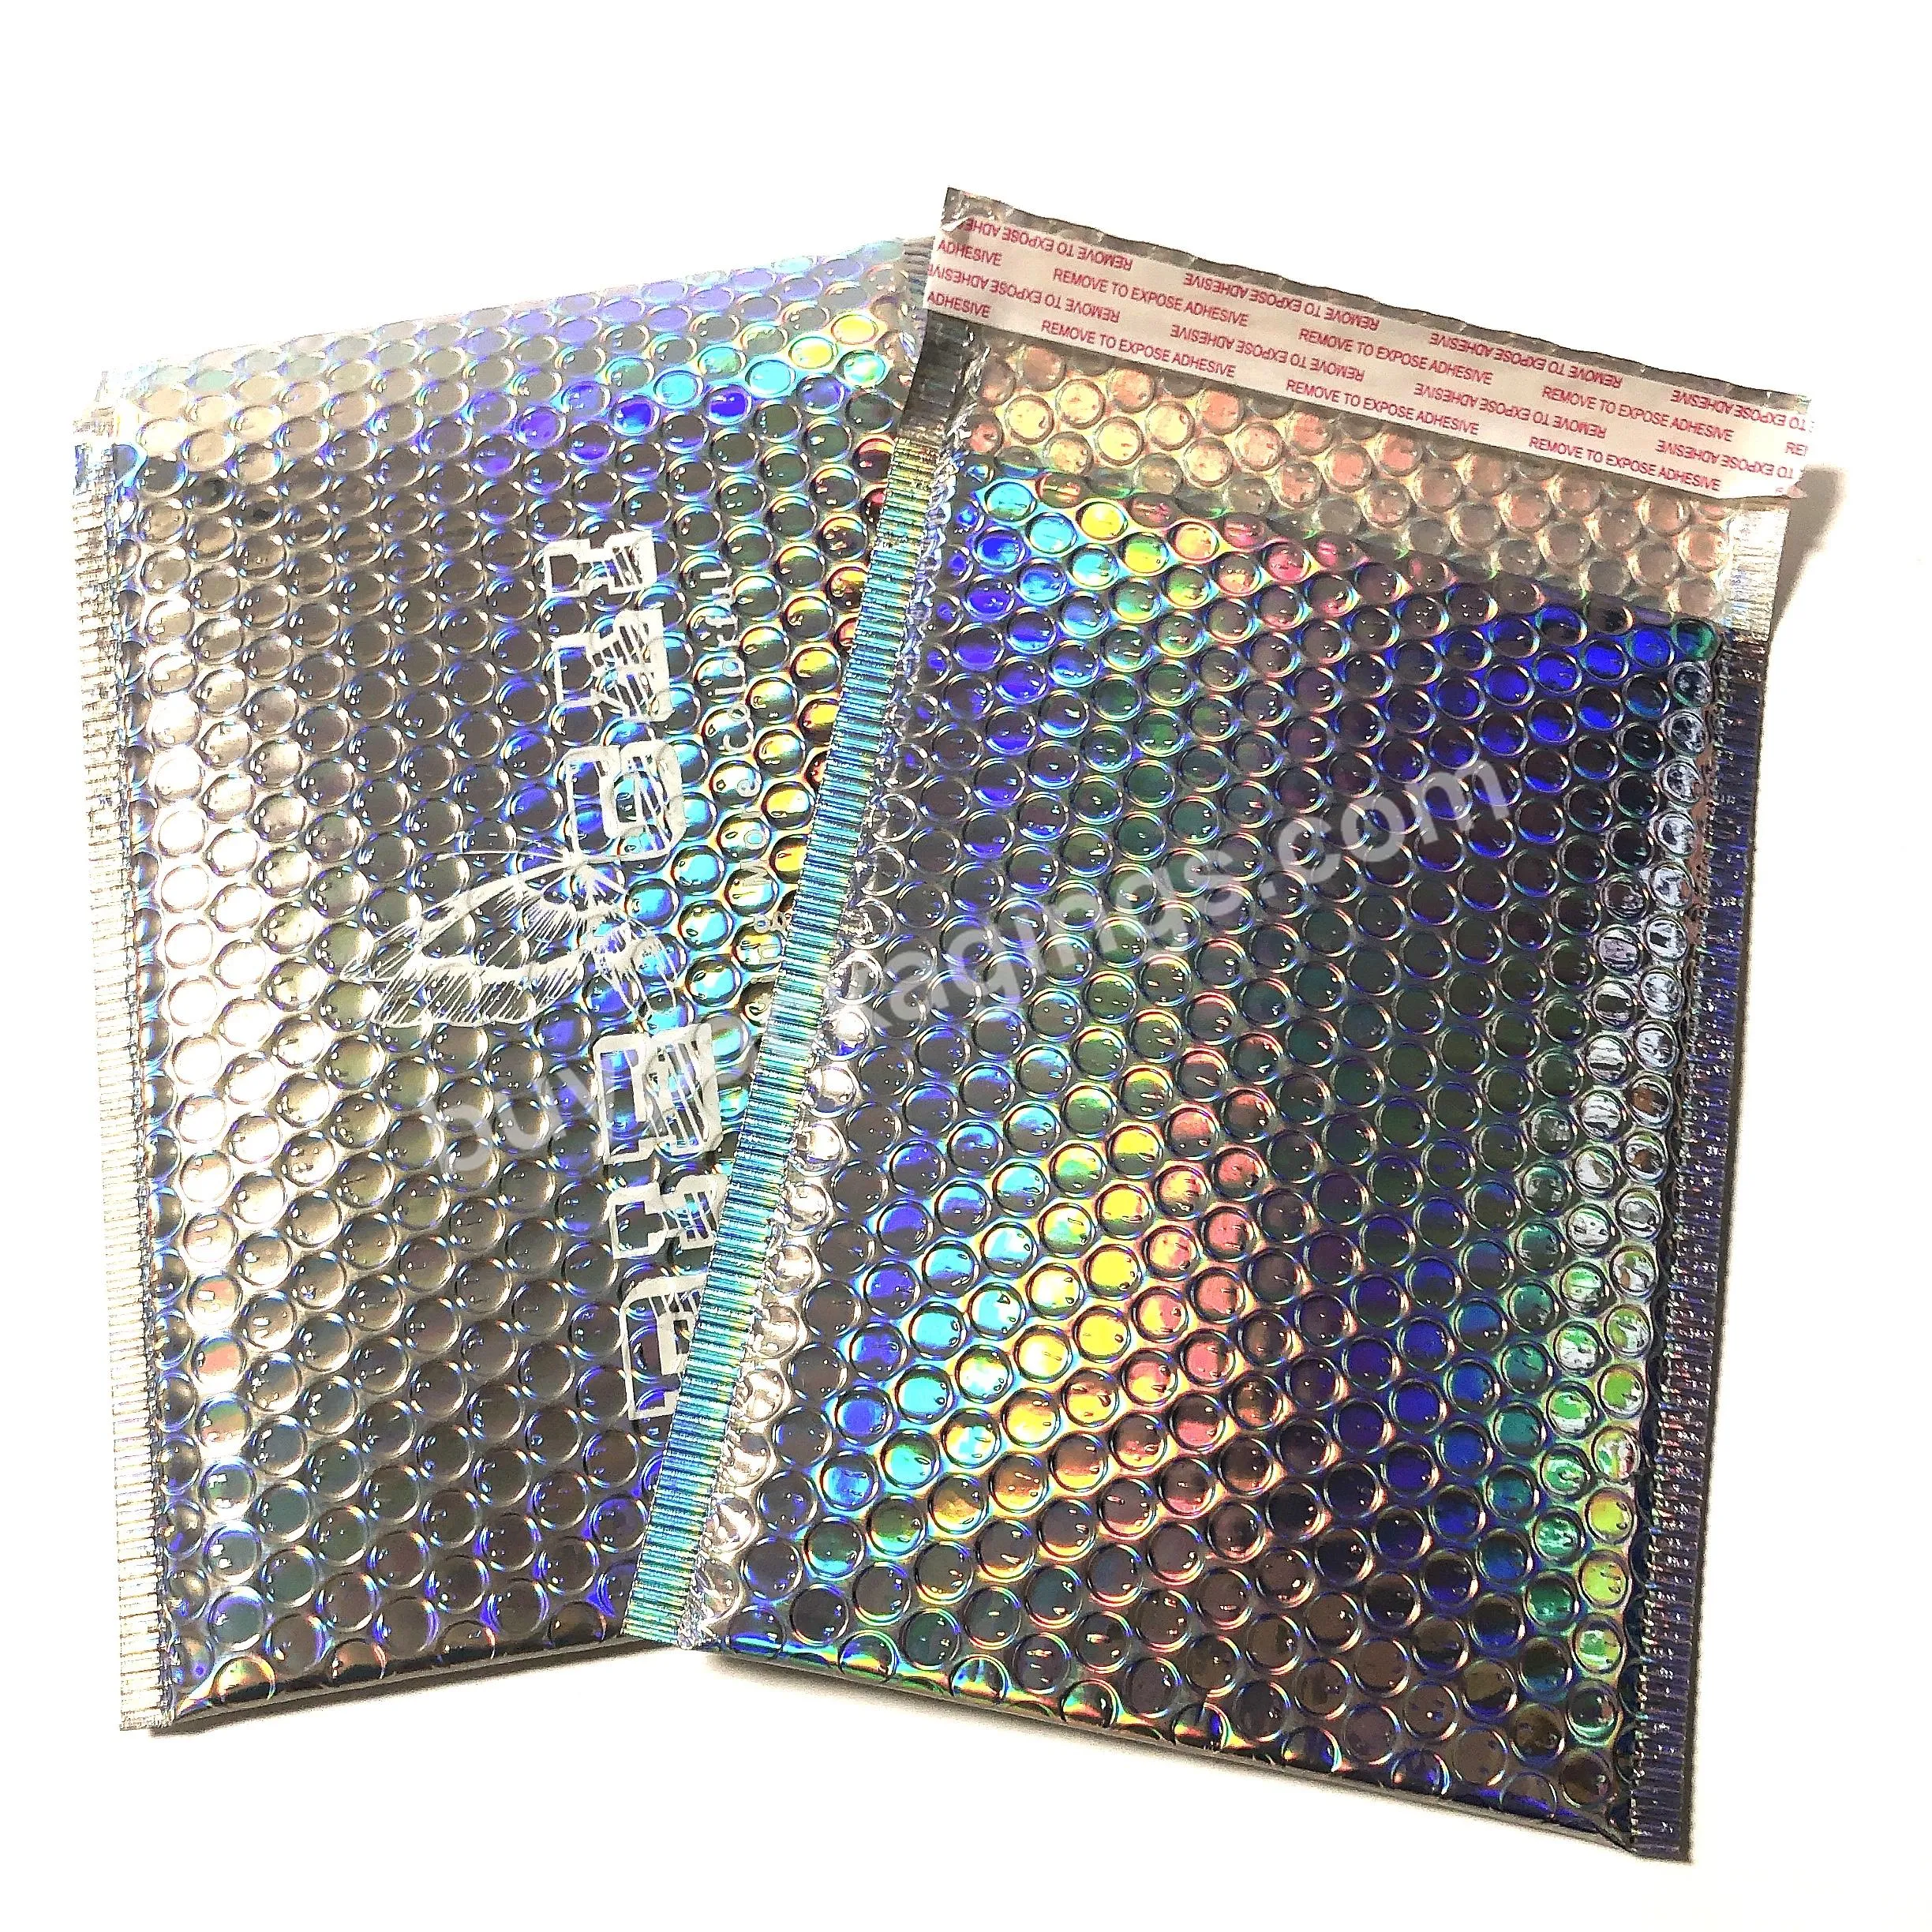 Customized Logo Packaging Bubble Envelope Holographic Bubble Mailers Self Seal Padded Envelopes Bags - Buy Holographic Bubble Mailers,Customised Logo Packaging,Bubble Envelope Holographic.